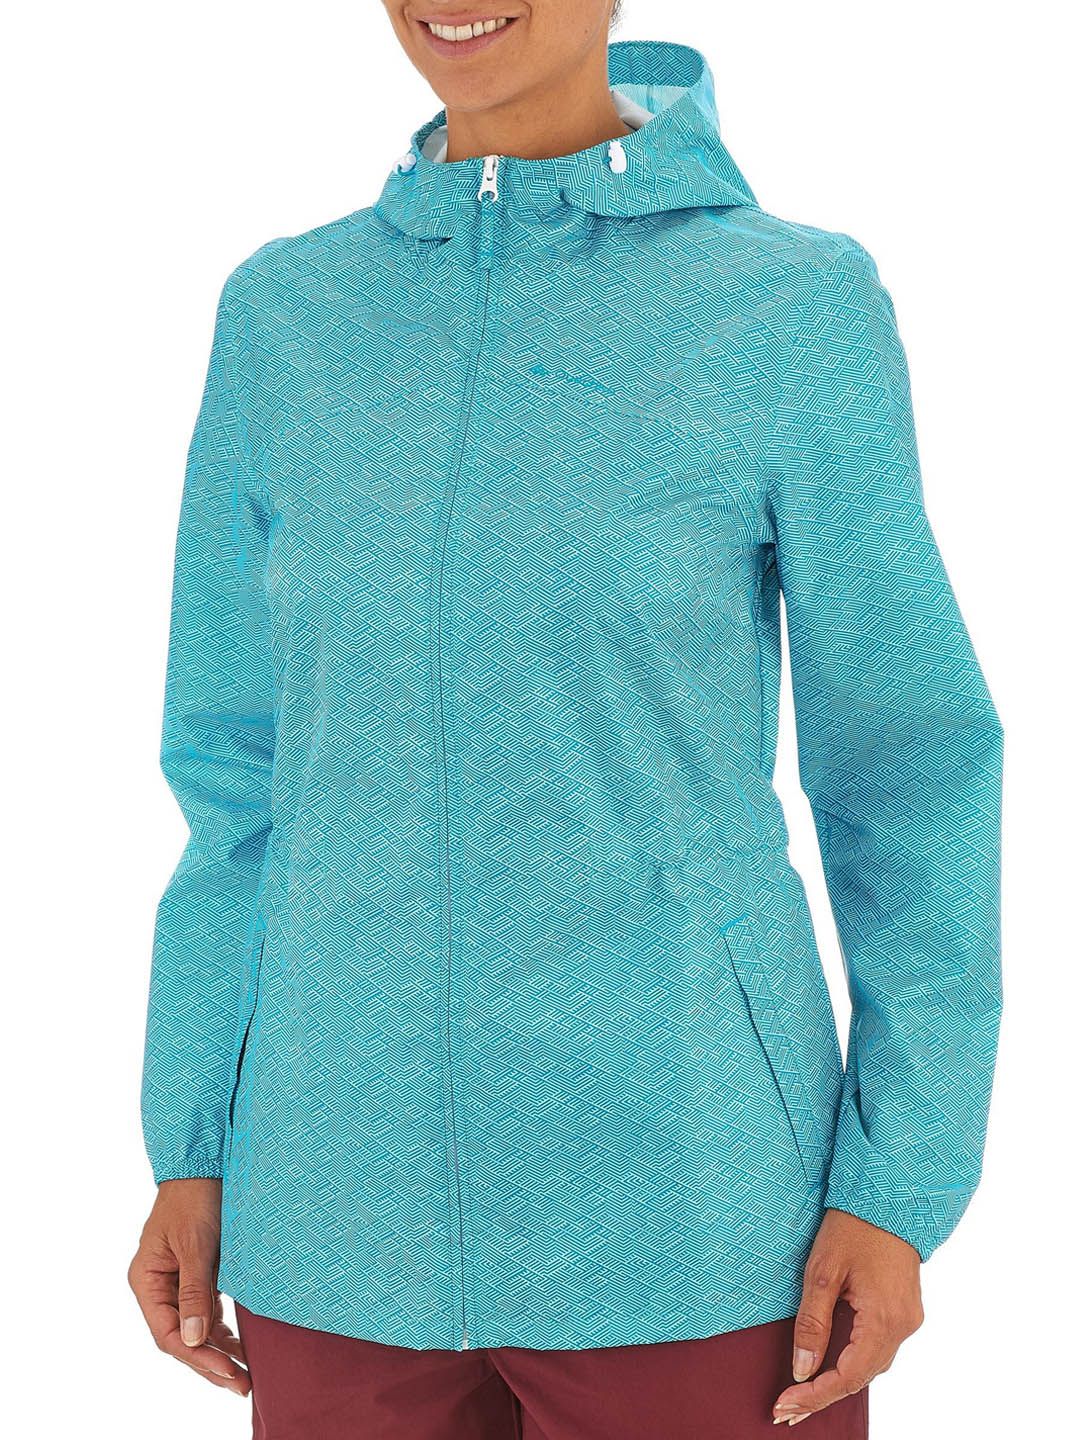 Quechua By Decathlon Women Blue Longline Open Front Jacket Price in India